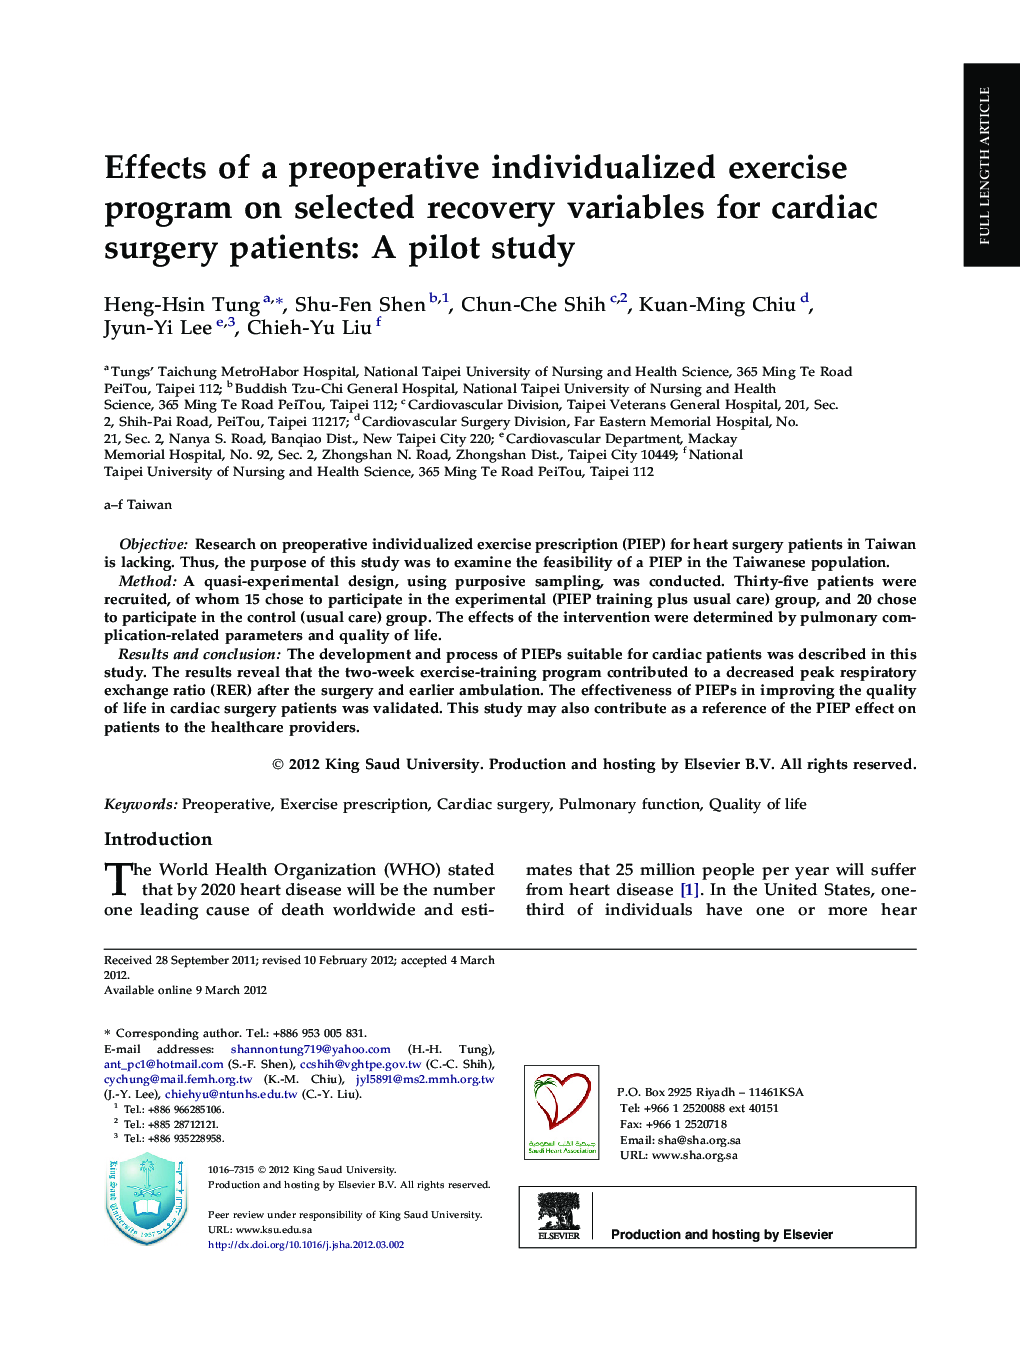 Effects of a preoperative individualized exercise program on selected recovery variables for cardiac surgery patients: A pilot study 